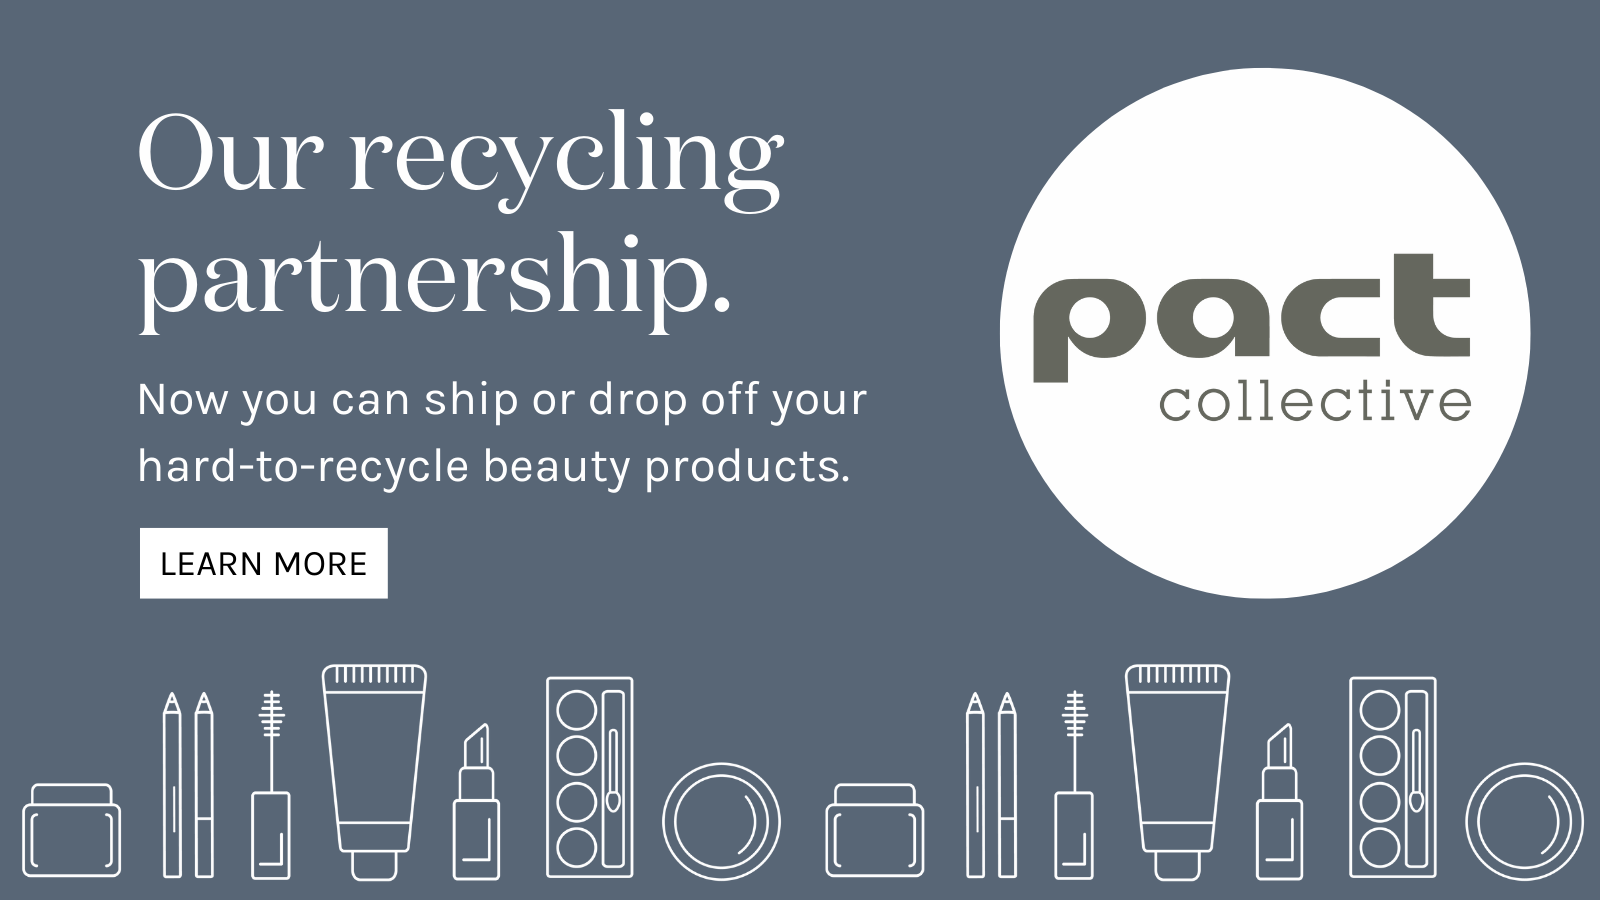 Pact. Our Recycling Partnership. Now you can ship or drop off your hard-to-recycle beauty products. Learn More